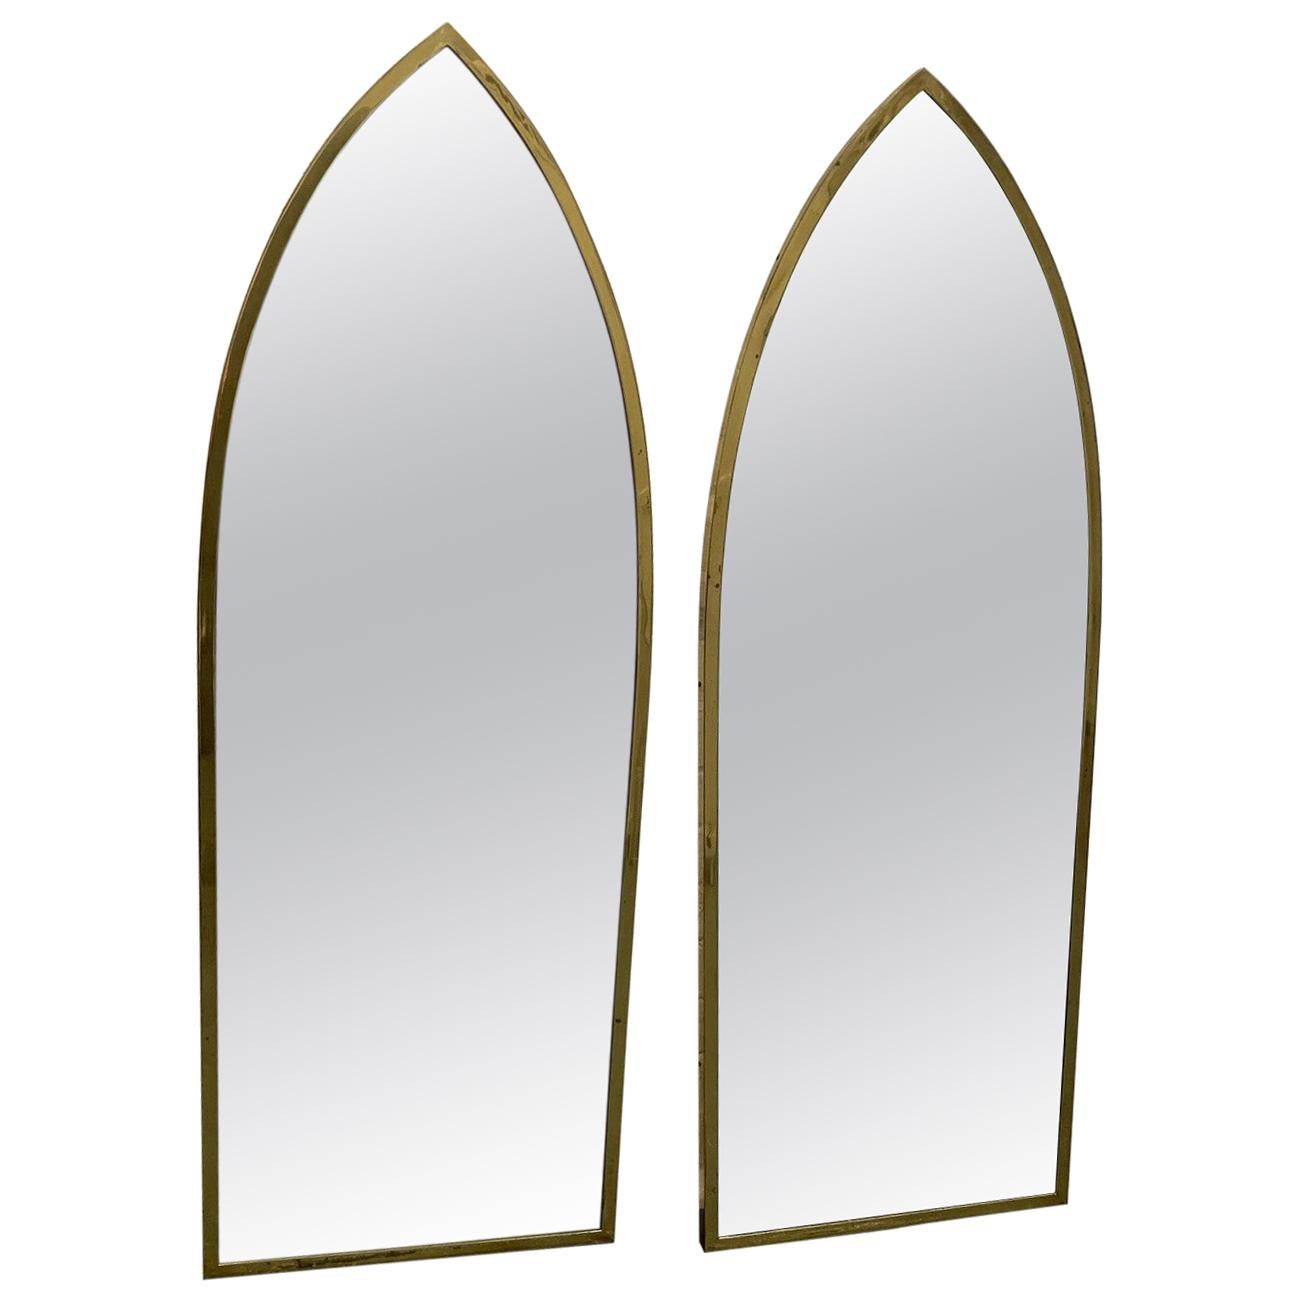 Pair of Mid-Century Modern Brass Arched Mirrors